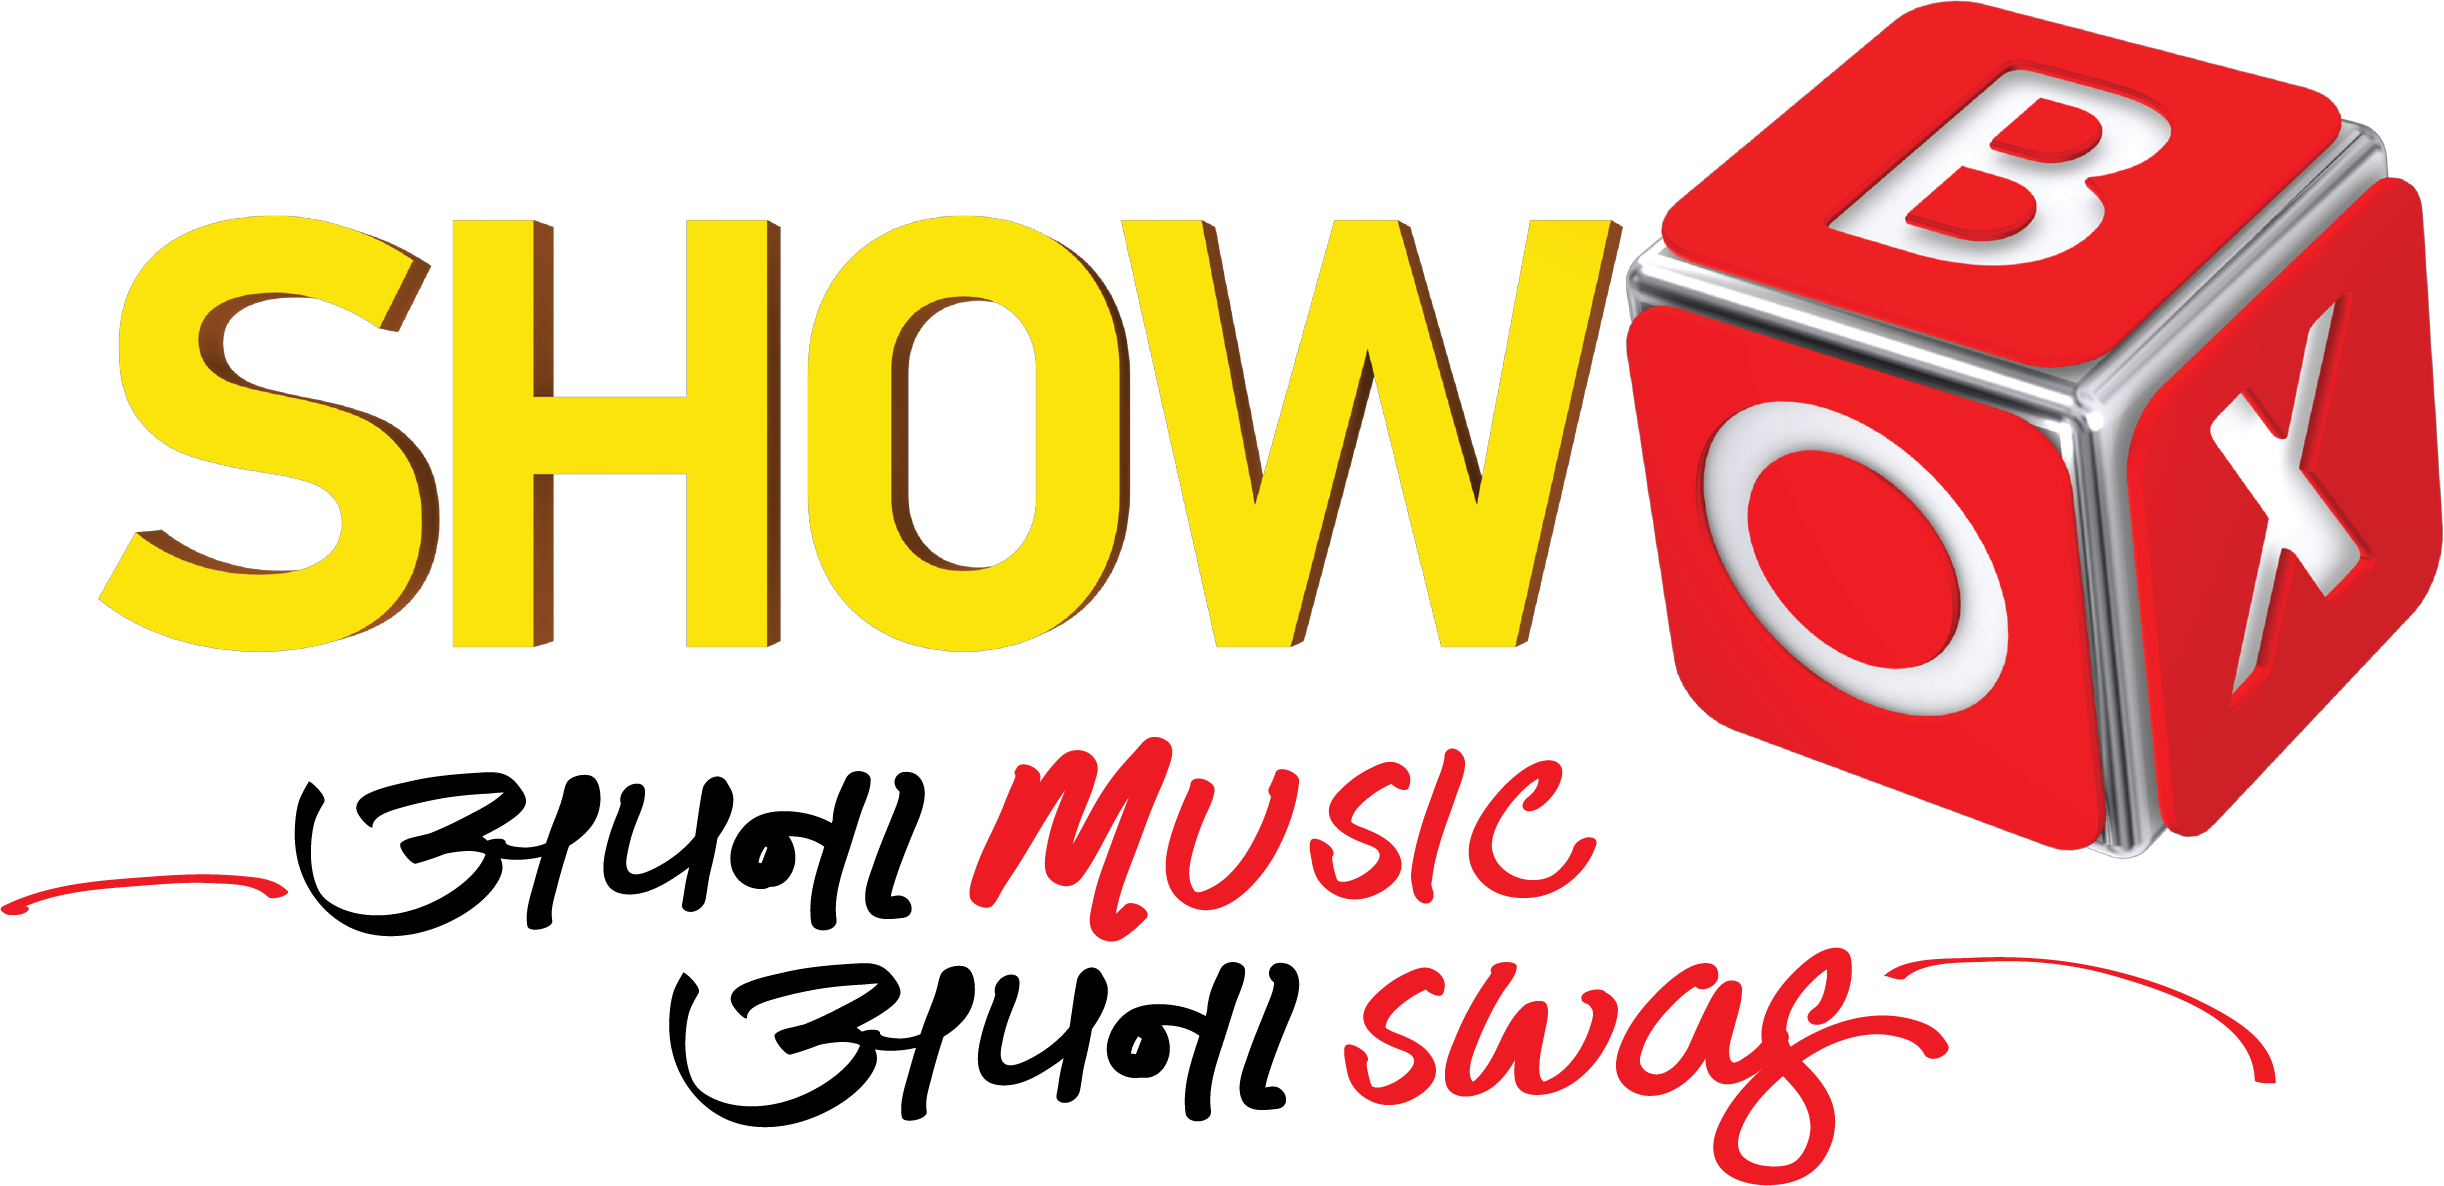 RED FM and ShowBox launch two new shows that will take you through music, culture, and Bollywood